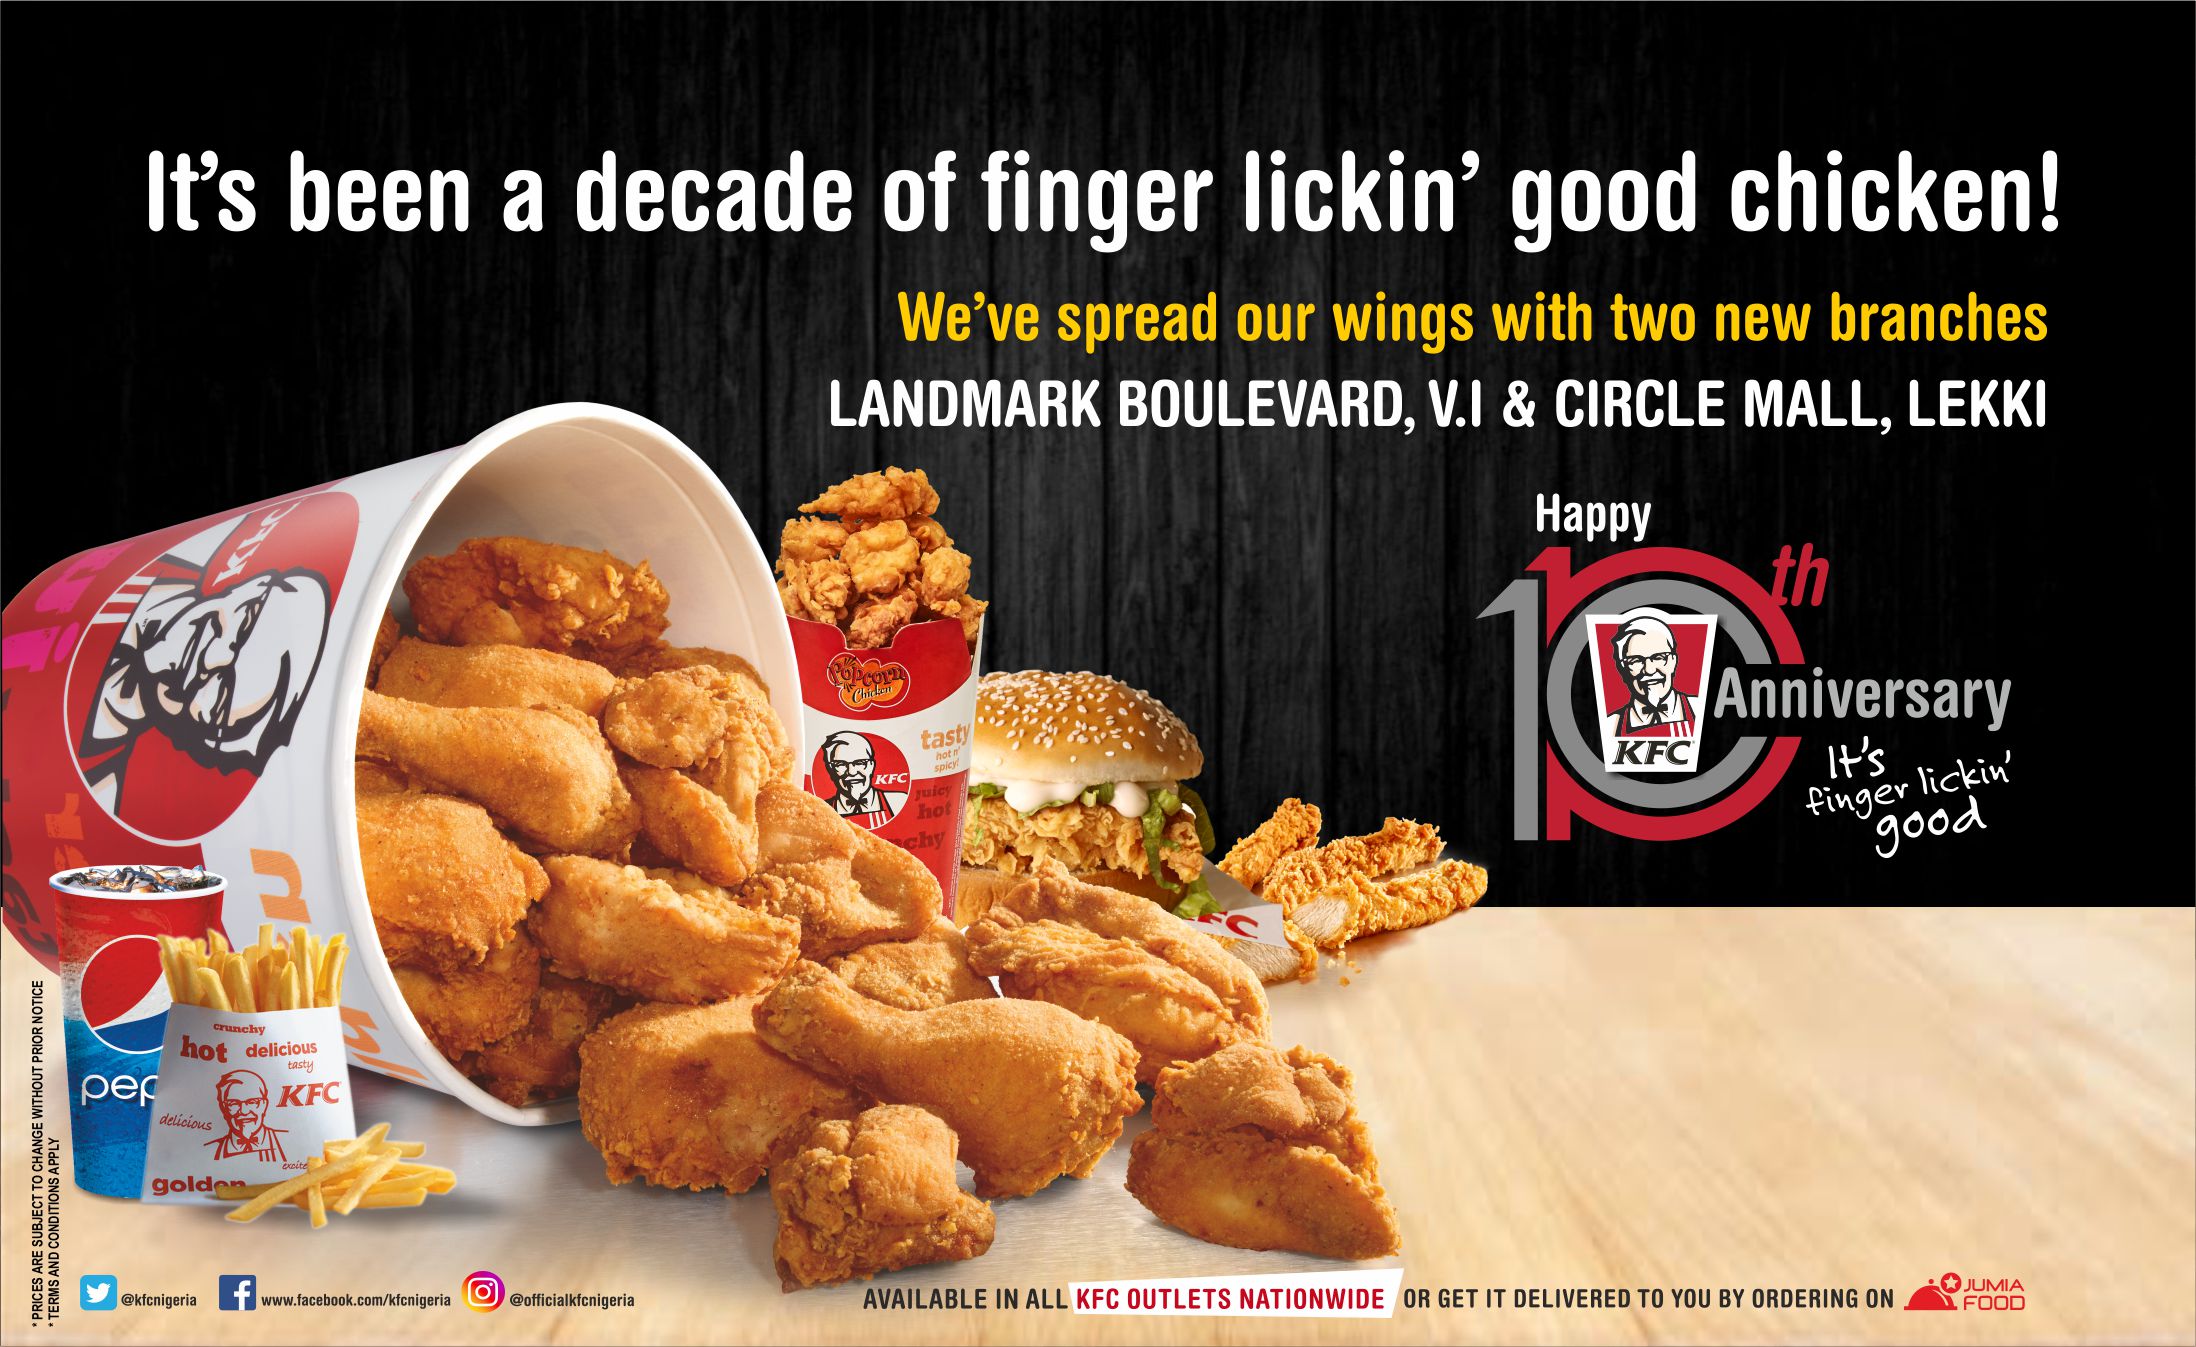 Thank you Nigeria, it's been 10 years of finger lickin' good chicken 